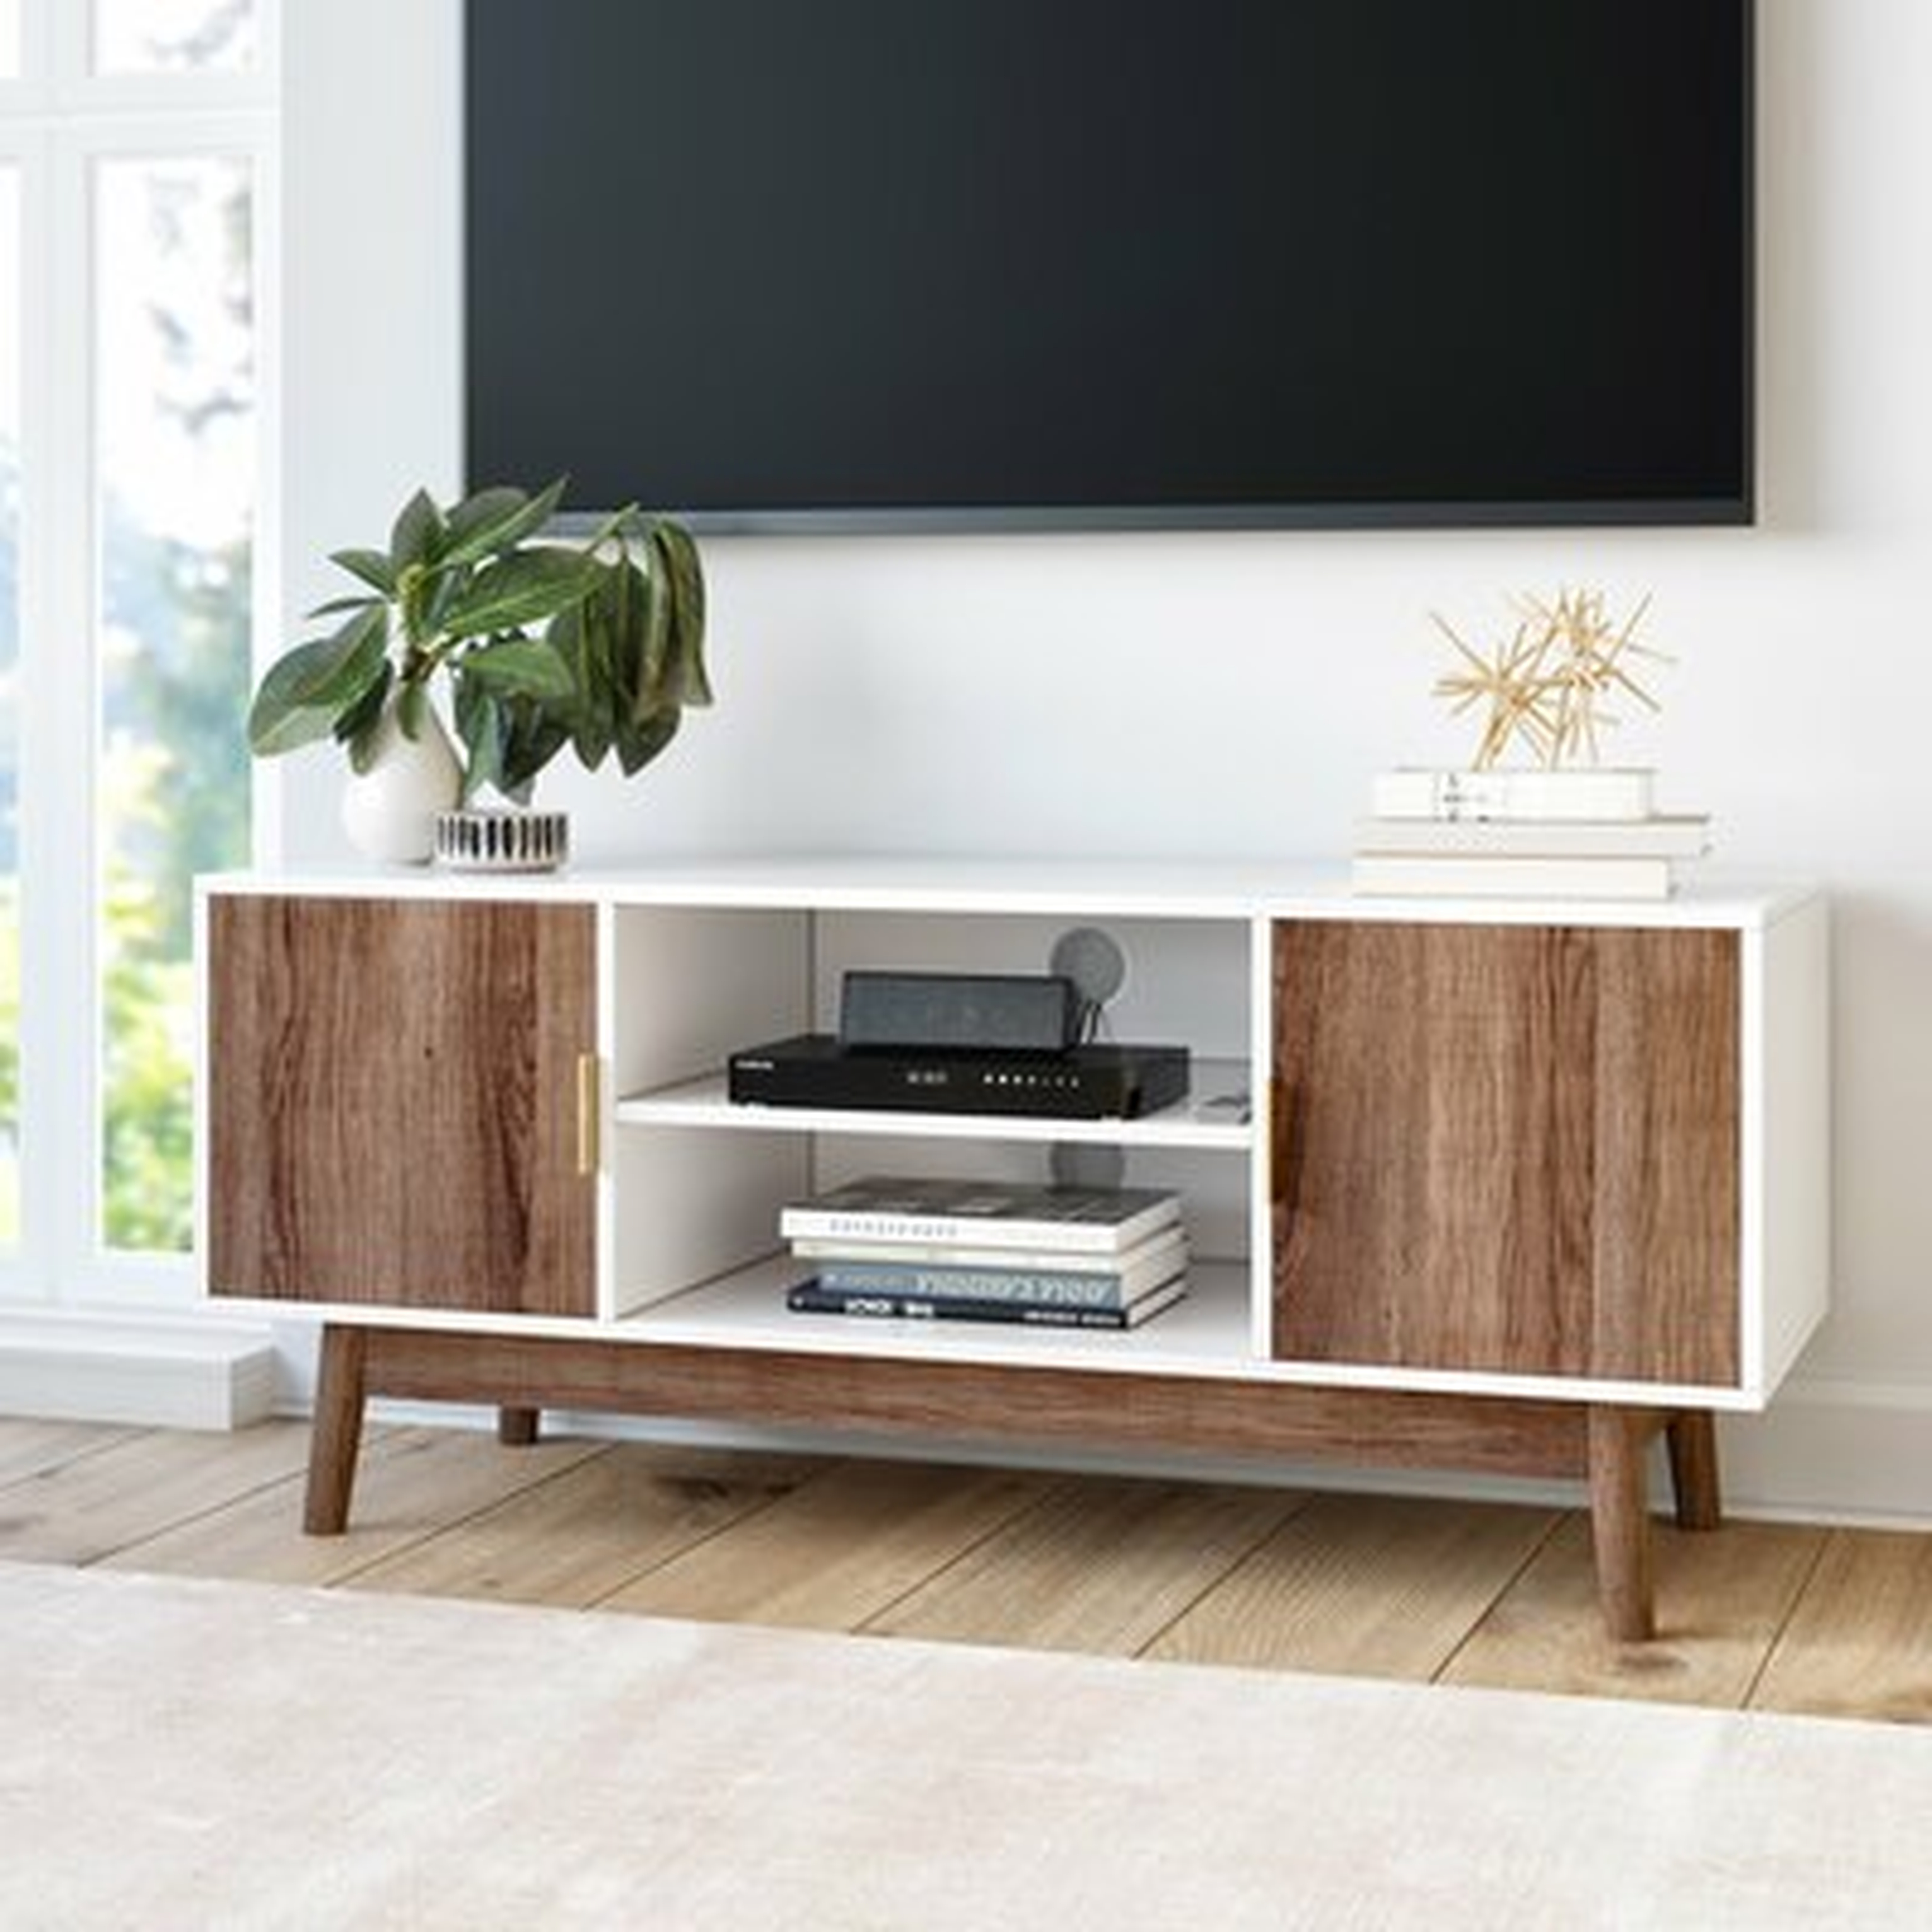 Gallaway TV Stand for TVs up to 40 - Wayfair